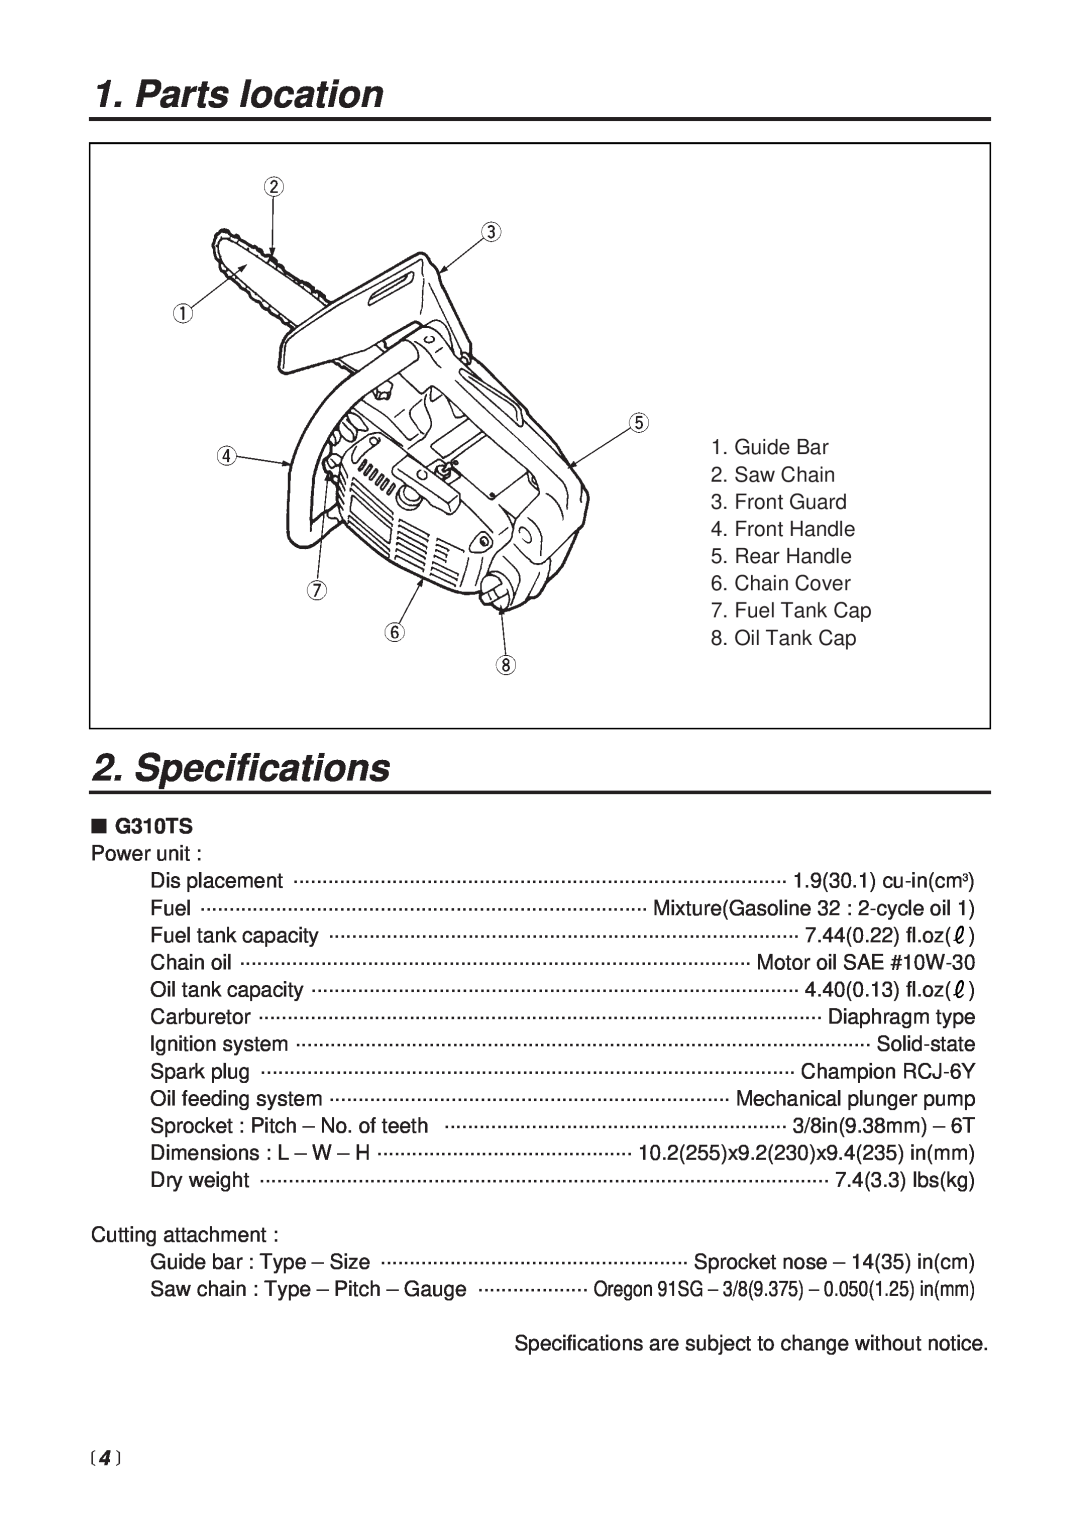 RedMax manual Parts location, Specifications, G310TS Power unit,  4  